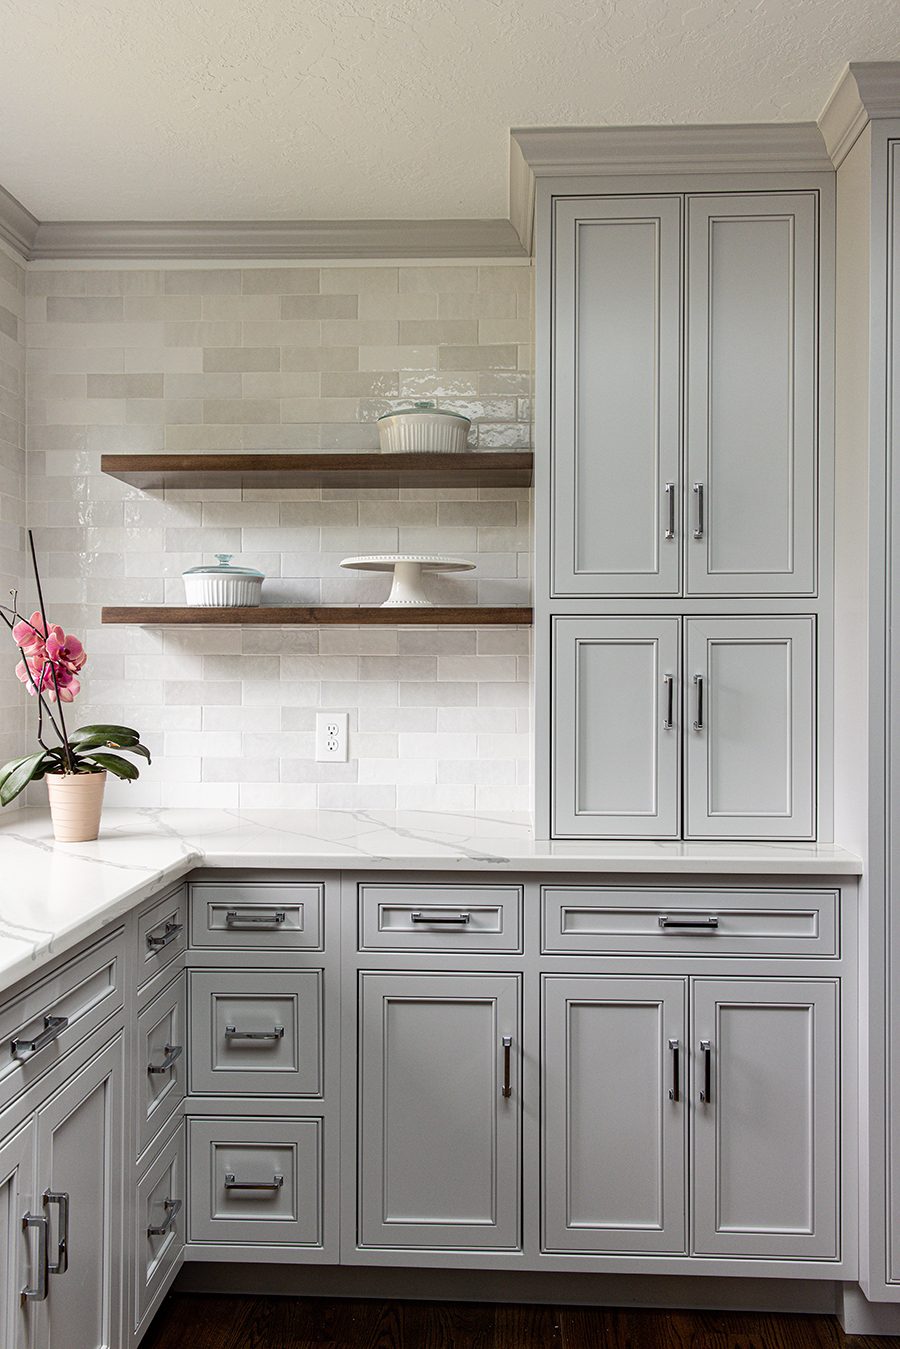 Doors vs. Drawers: Which is Best for Kitchen Cabinets?